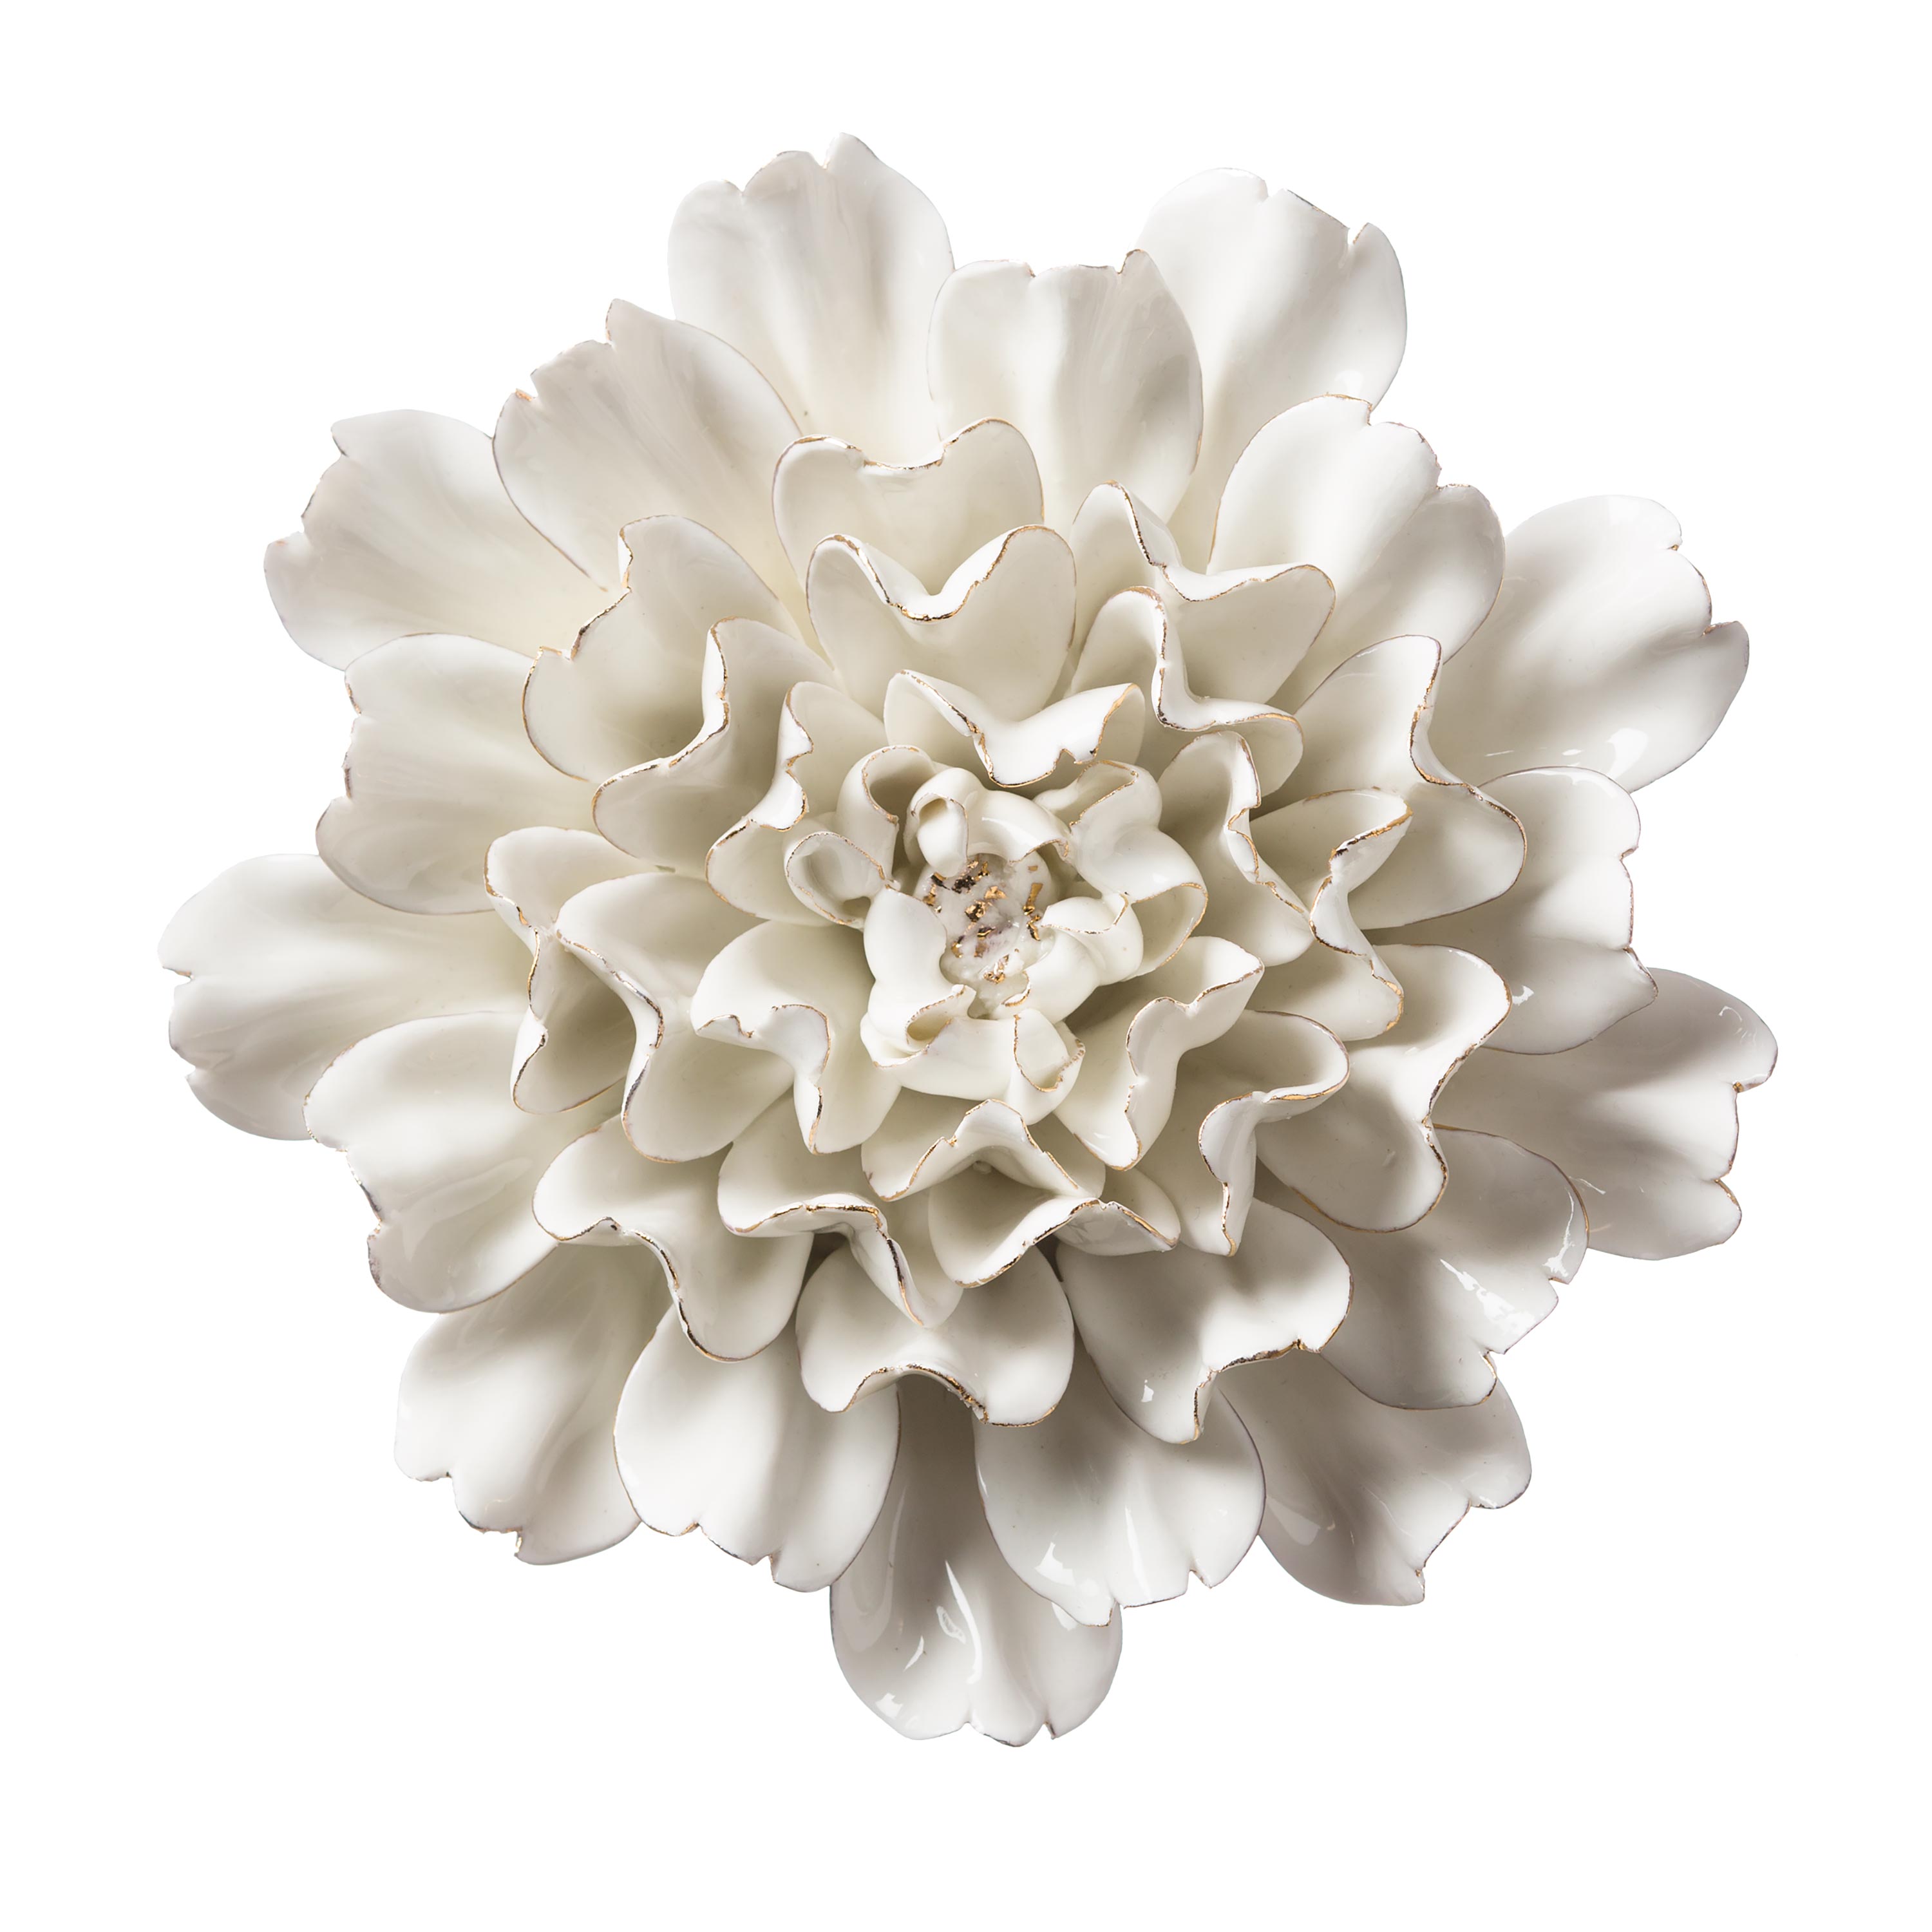 Gold-Rimmed White Ceramic Wall Flowers